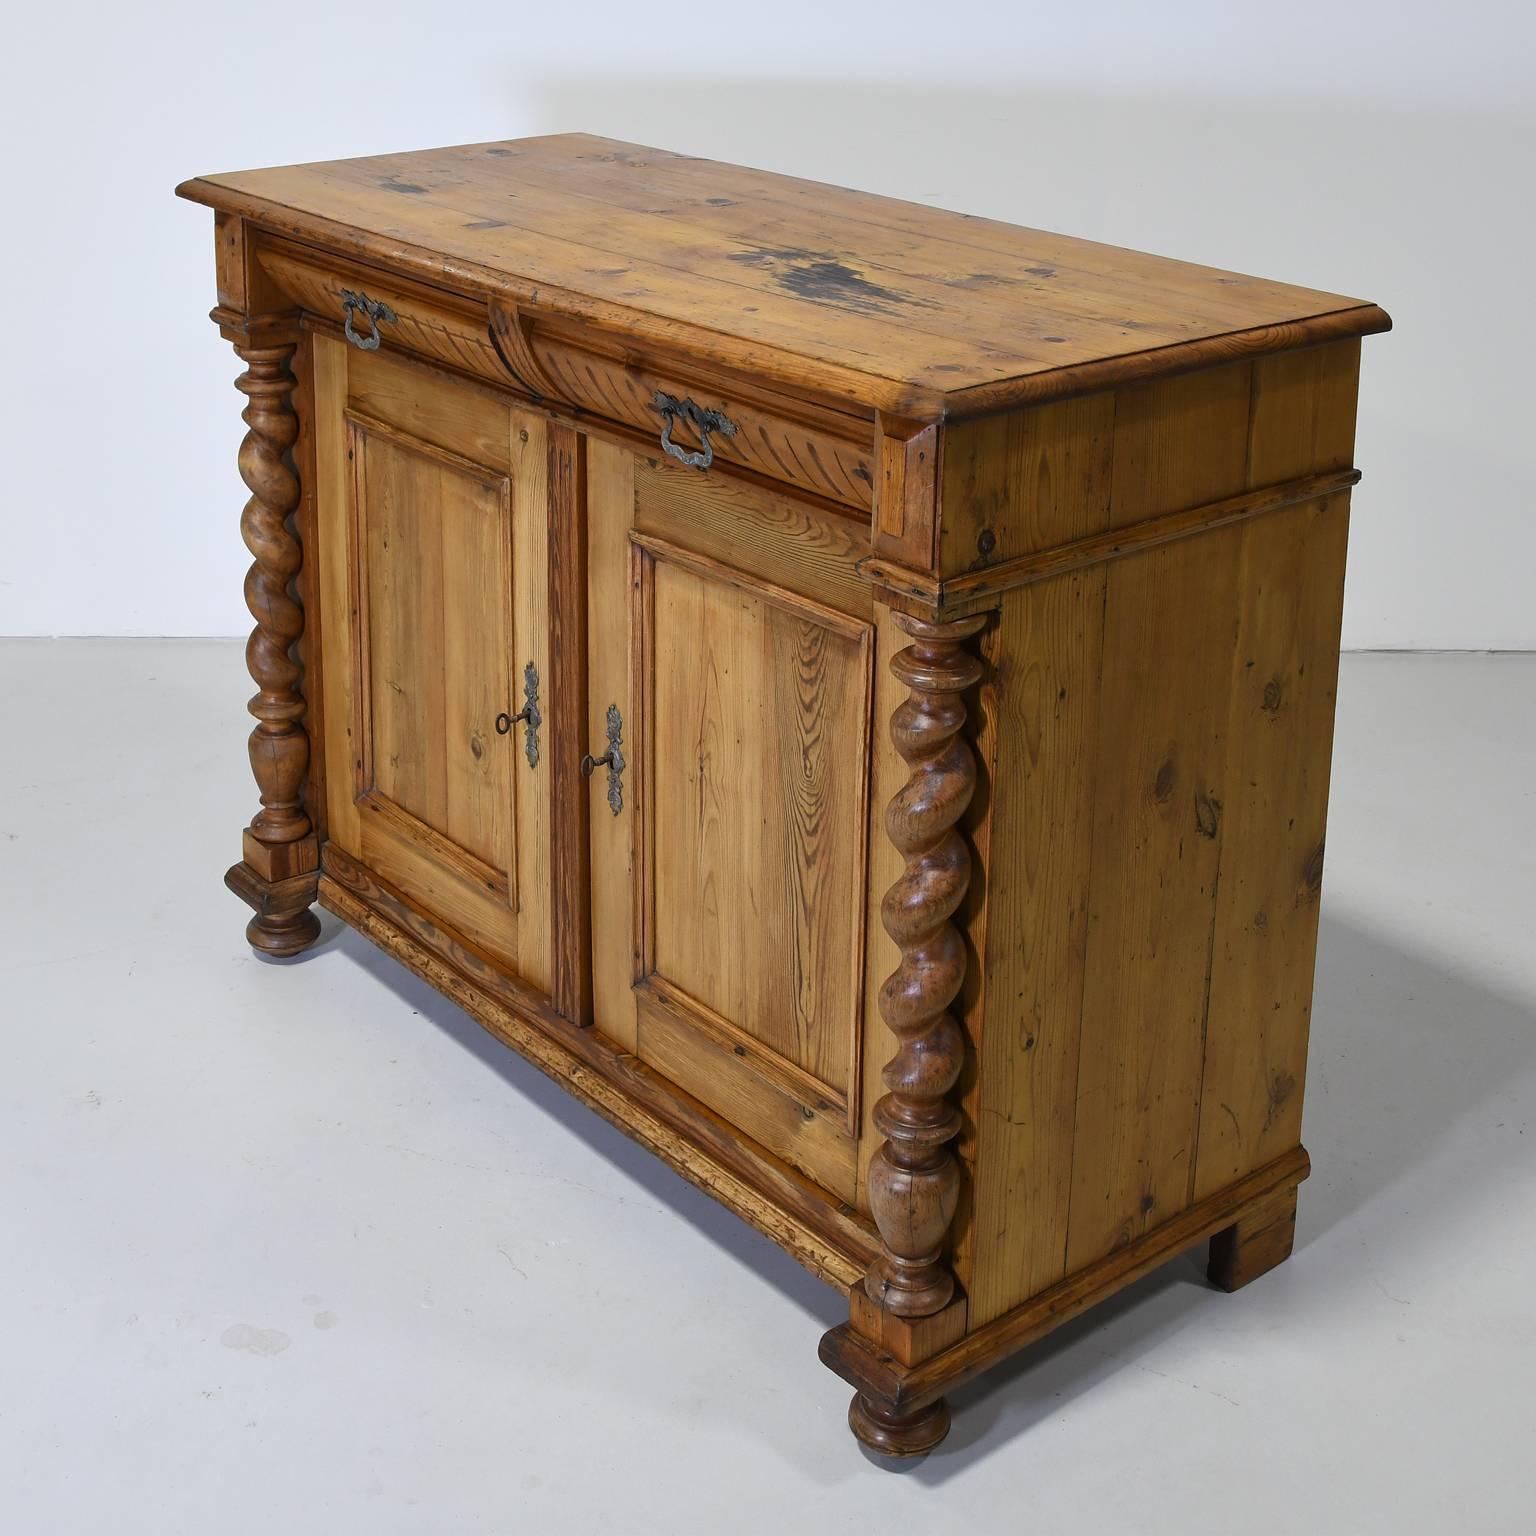 A Danish server in pine with two convex fluted drawers over two cabinet doors and rope-turned columns flanking each. Scandinavian or German, circa 1860. Cabinet doors open independent of each other featuring original interior shelving on both sides.